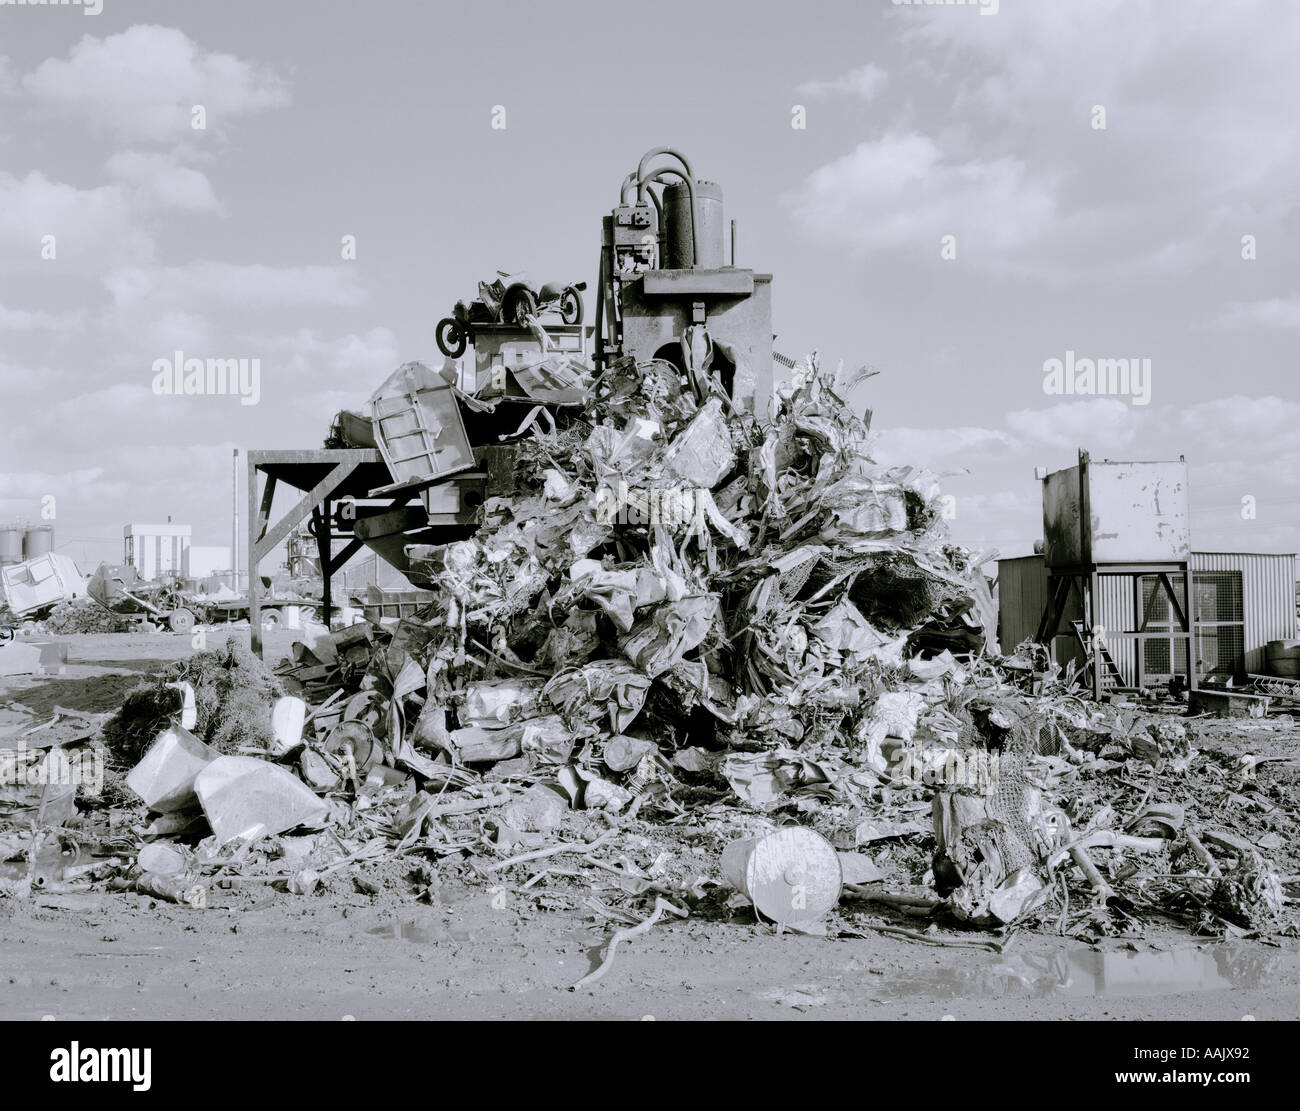 Rubbish Tip in London in England in Great Britain in the United Kingdom UK. Junk Refuse Modern Life Garbage Beauty Urban City Surrealism Stock Photo